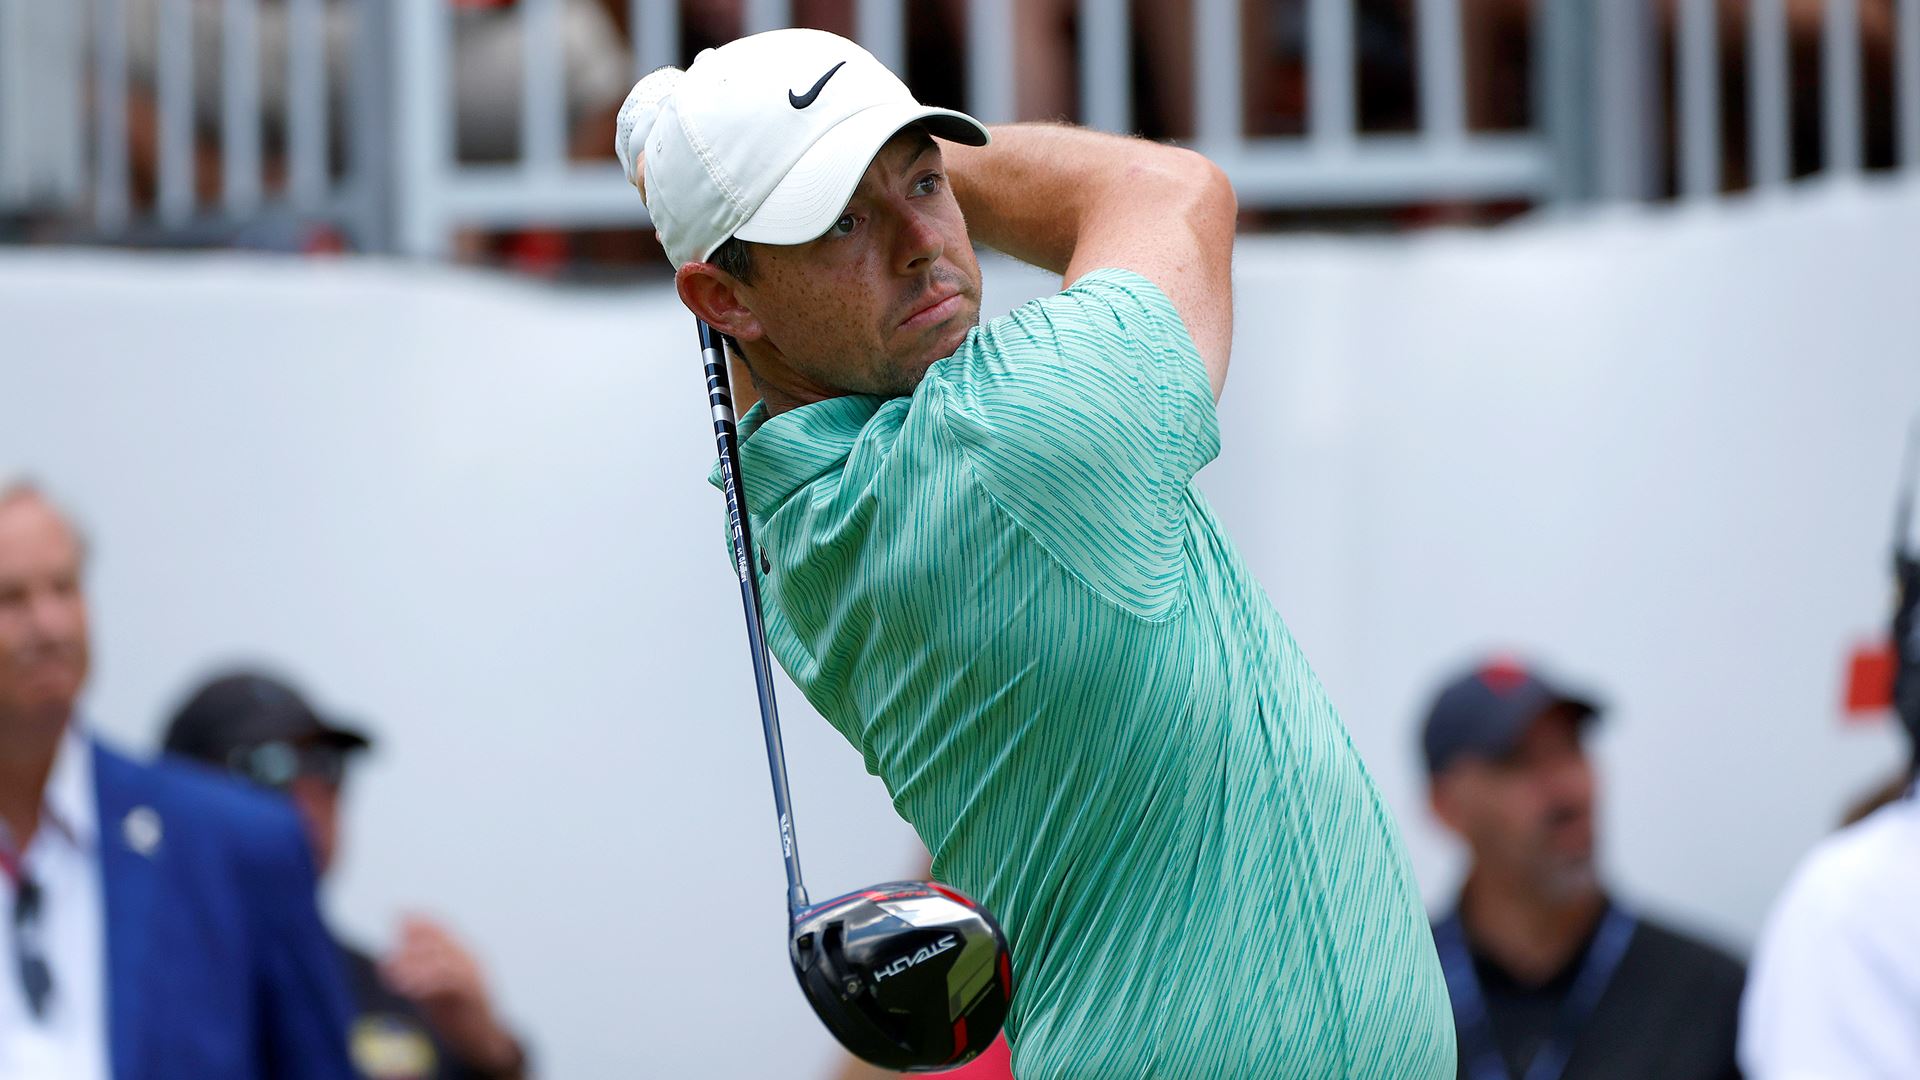 Rory McIlroy Wins TOUR Championship and FedExCup With Stealth Plus Driver and TP5x Golf Ball